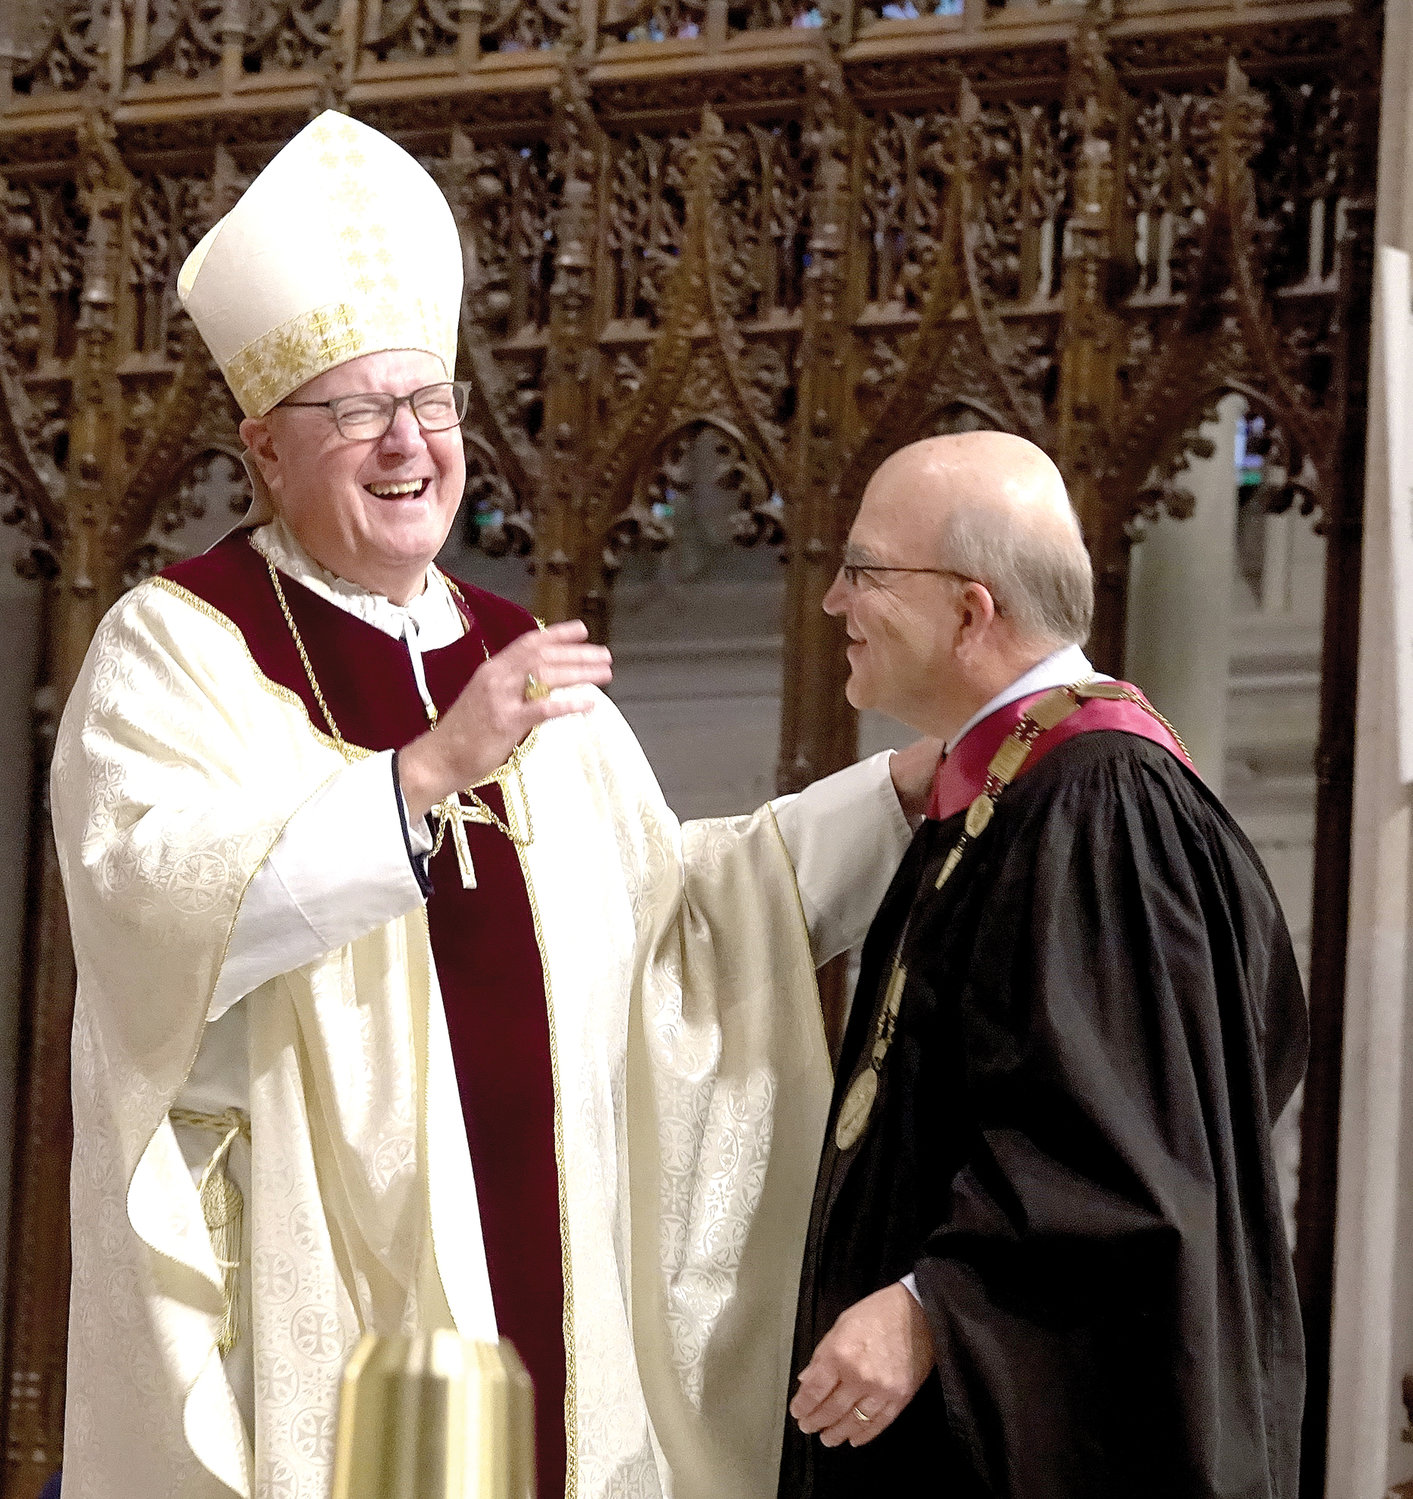 Cardinal Dolan greets Xavier High School President Jack Raslowsky, who had just delivered remarks near the conclusion of the Mass marking the opening of Xavier’s 175th anniversary year.